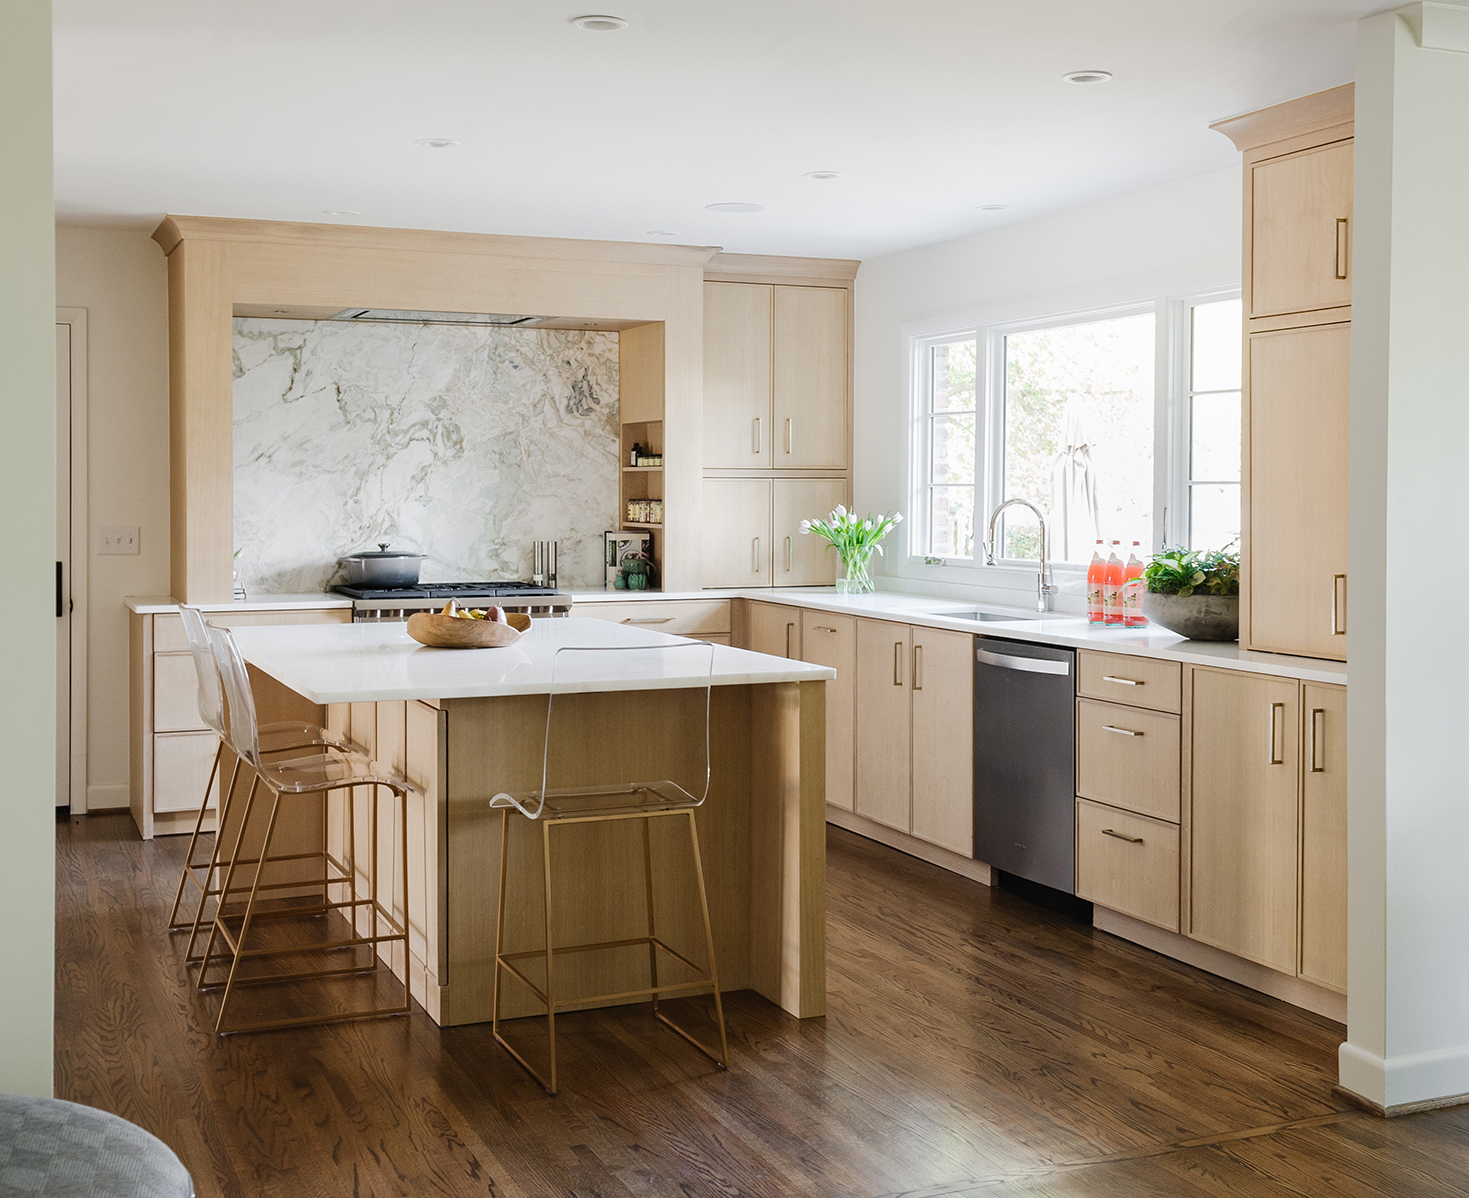 Light and airy kitchen with light wood cabinets and marble countertops and backsplash